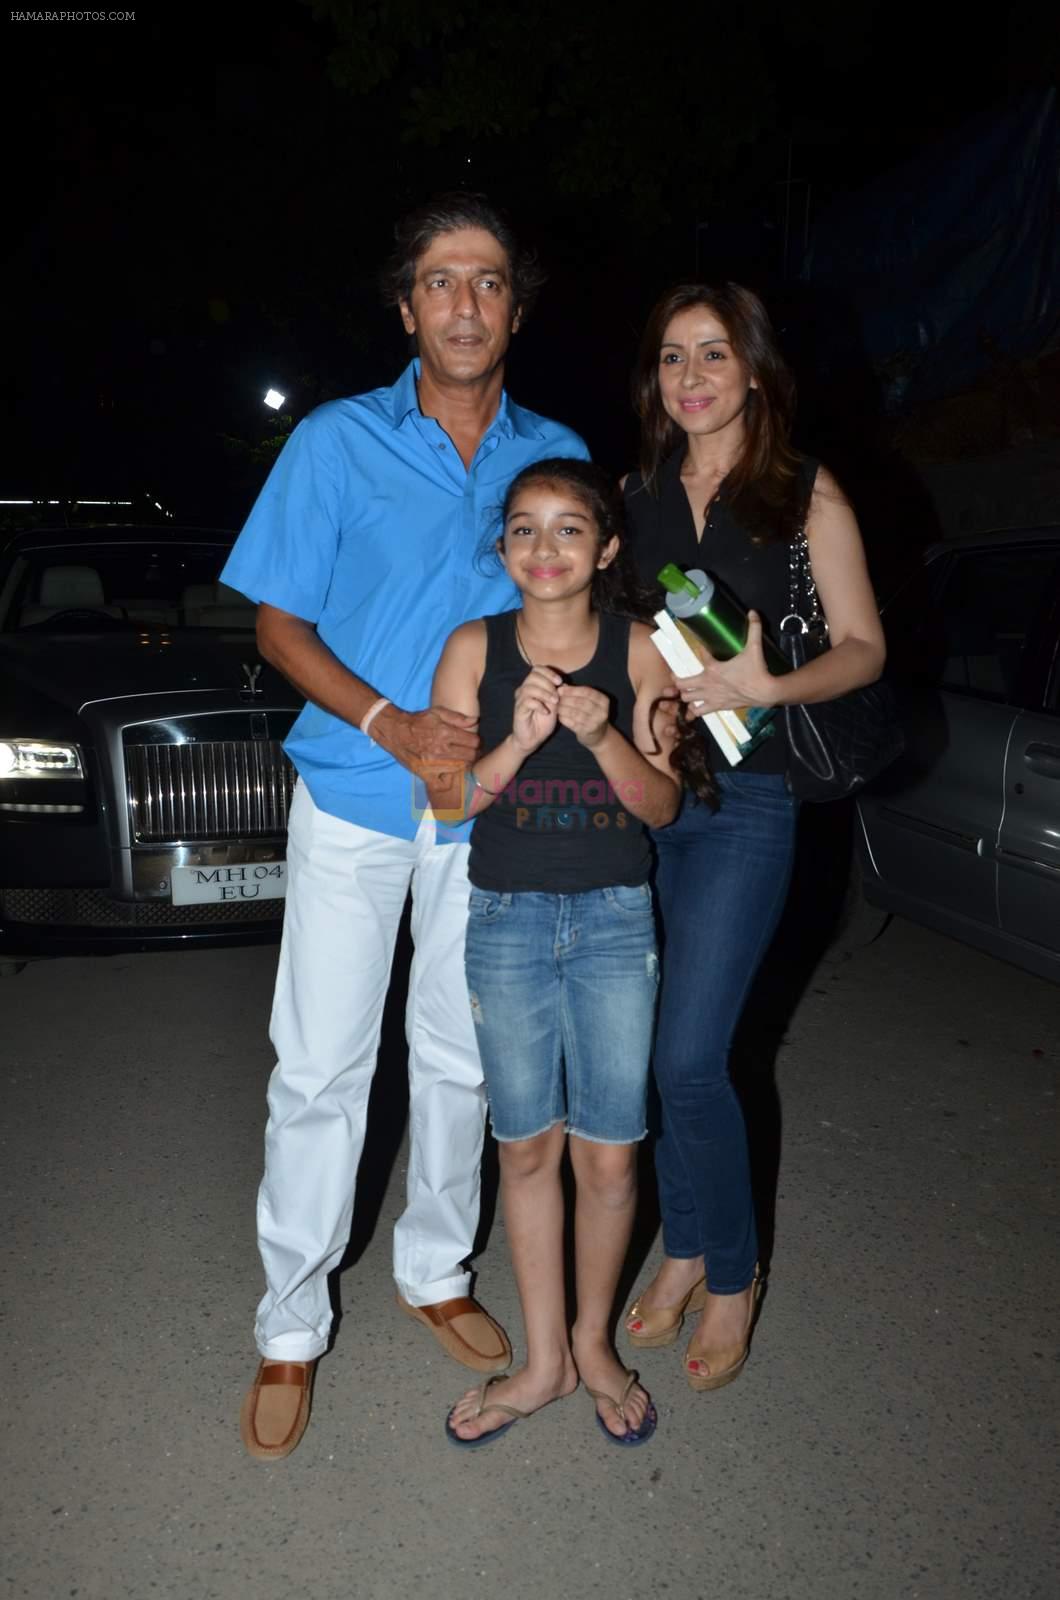 Chunky Pandey with wife and kid at Shiamak Dawar show in Mumbai on 30th May 2015